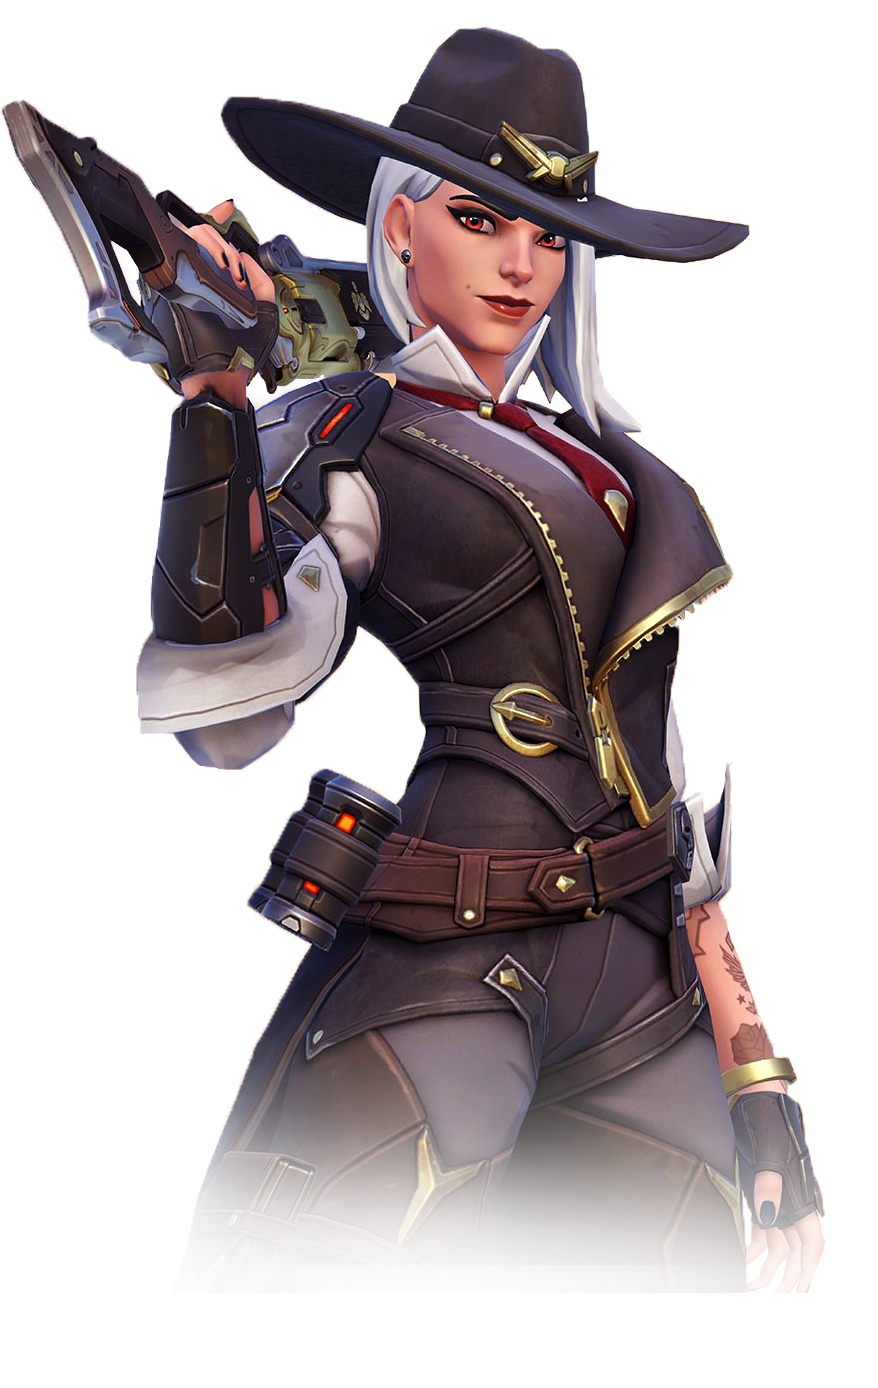 Ashe is a hero of Overwatch. She is the leader of the Deadlock Gang and a rebellious gunslinger who's not afraid to get her hands dirty. Ashe quickly fires her rifle from the hip or uses her weapon’s aim-down sights to line up a high damage shot. She blasts enemies by throwing dynamite, and her coach gun packs enough punch to put some distance between her and her foes. And Ashe is not alone, as she can call on her omnic ally B.O.B., to join the fray when the need arises.